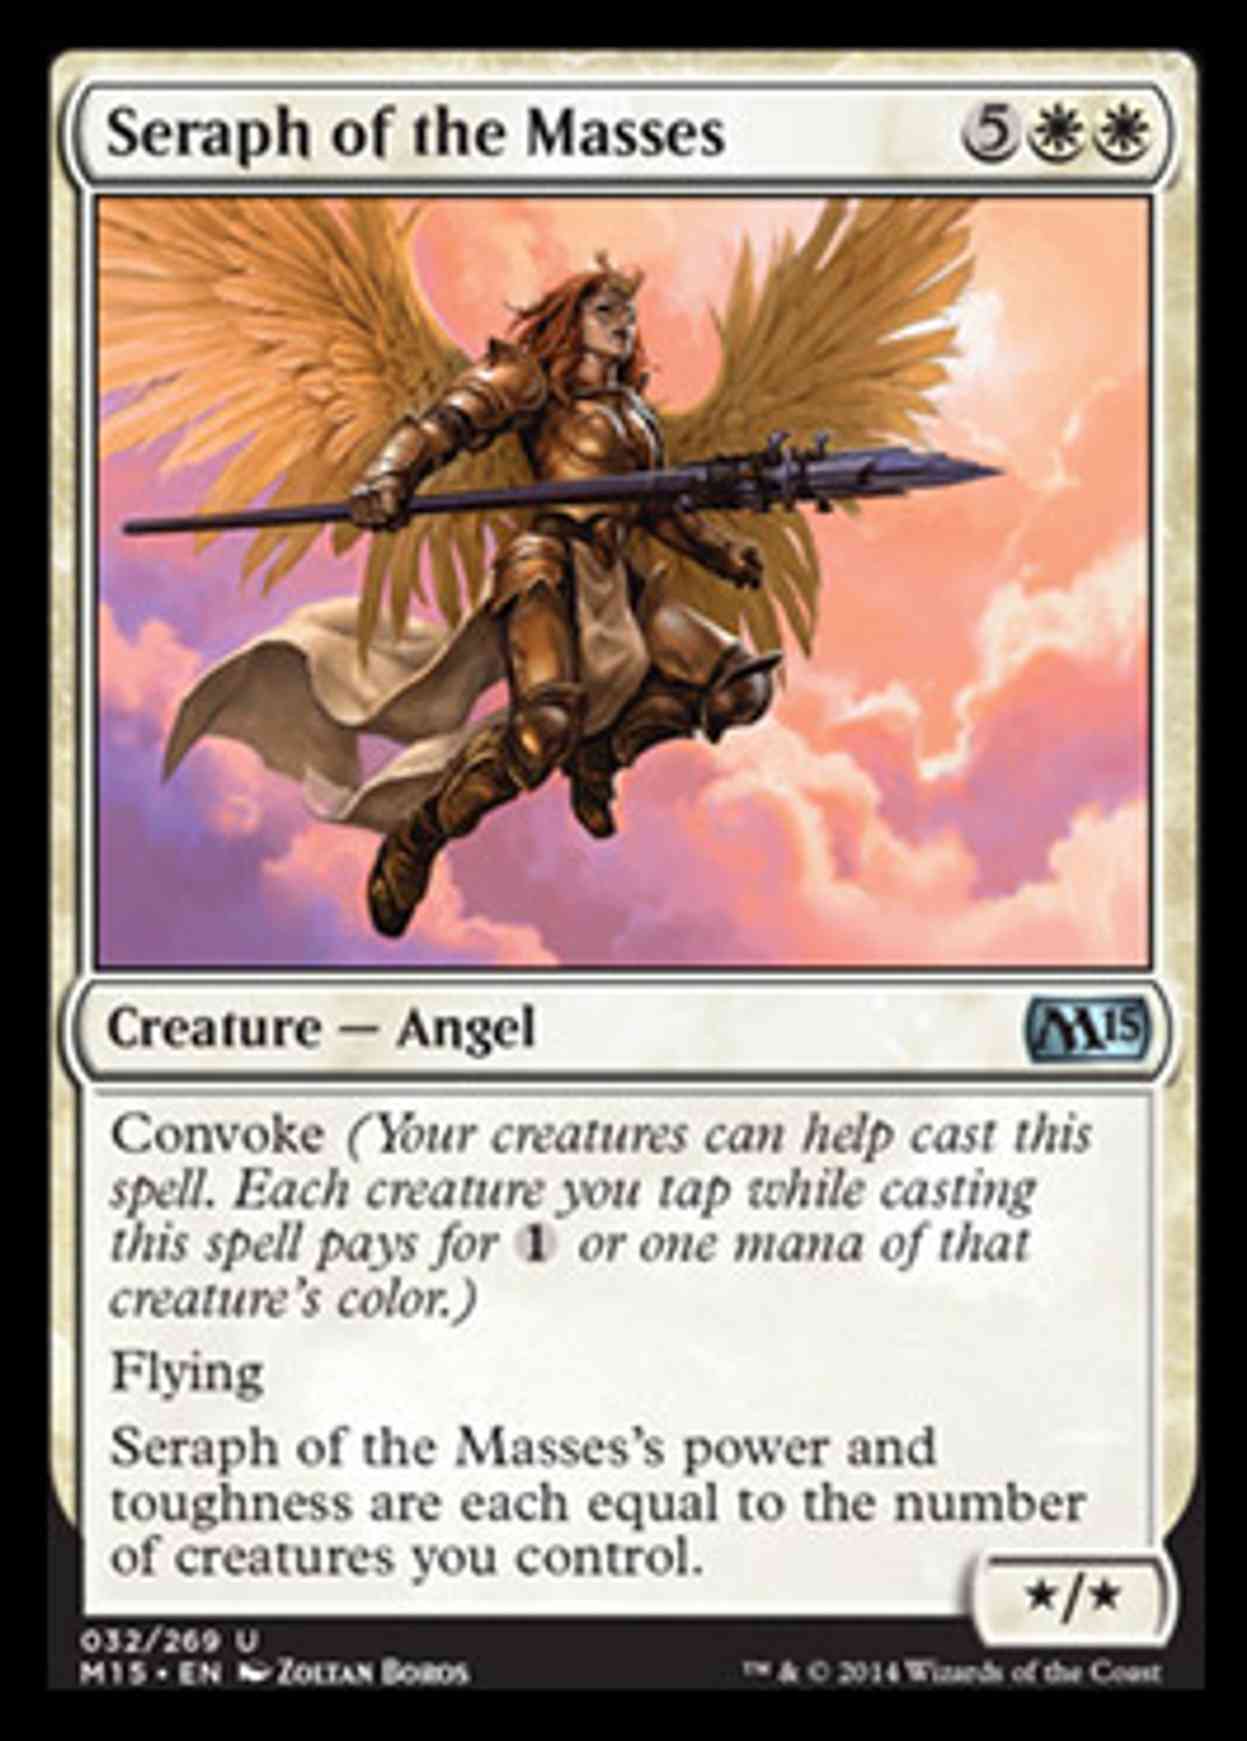 Seraph of the Masses magic card front